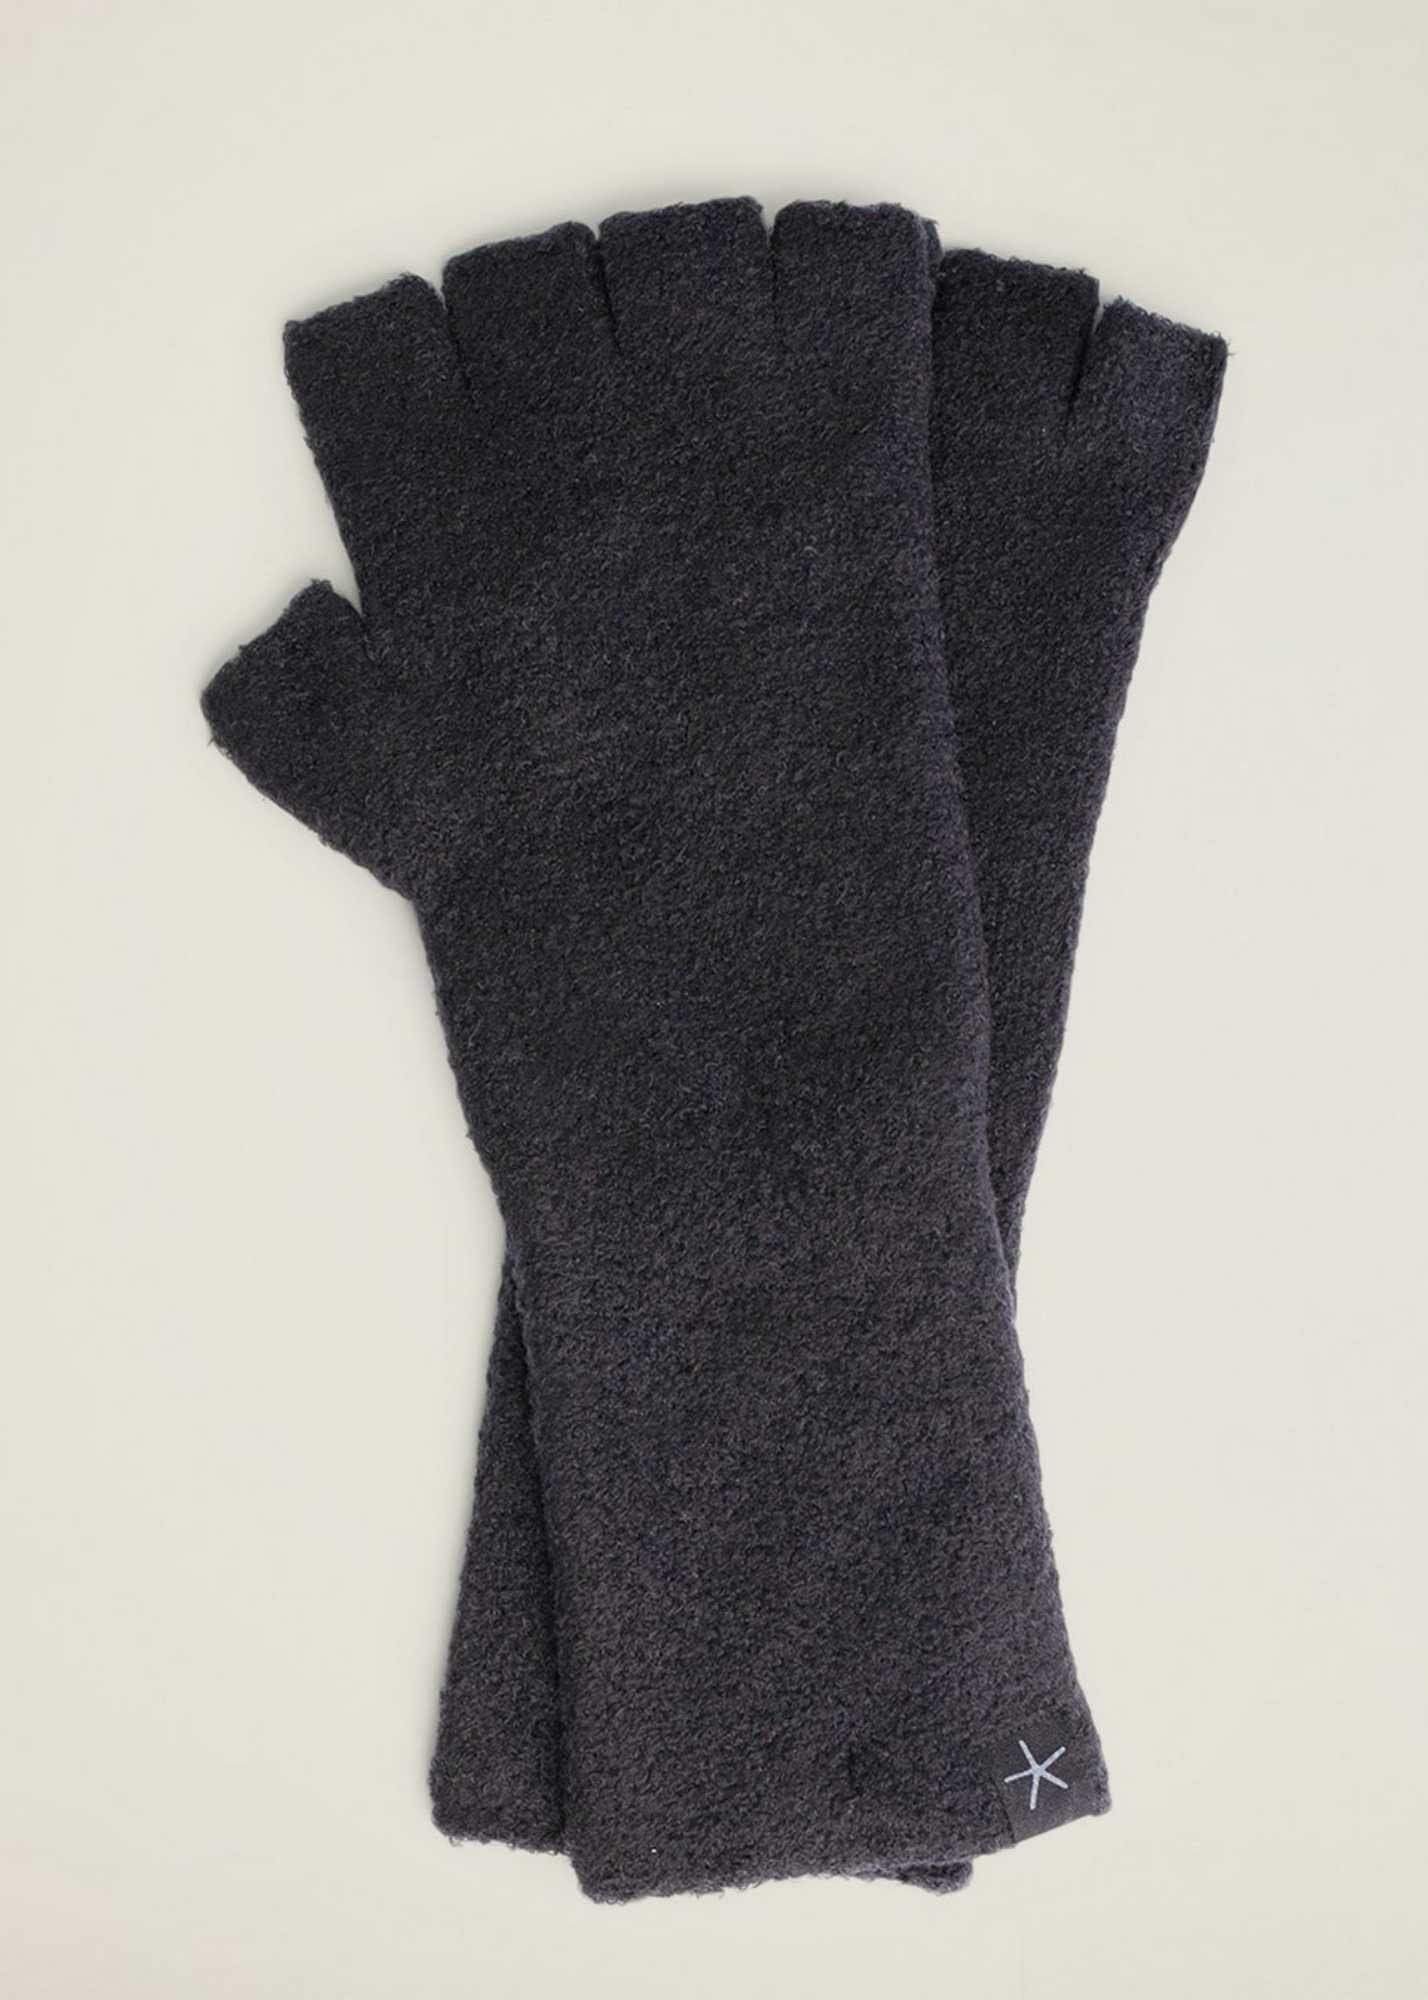 COZYCHIC FINGERLESS GLOVES - Assorted Colors